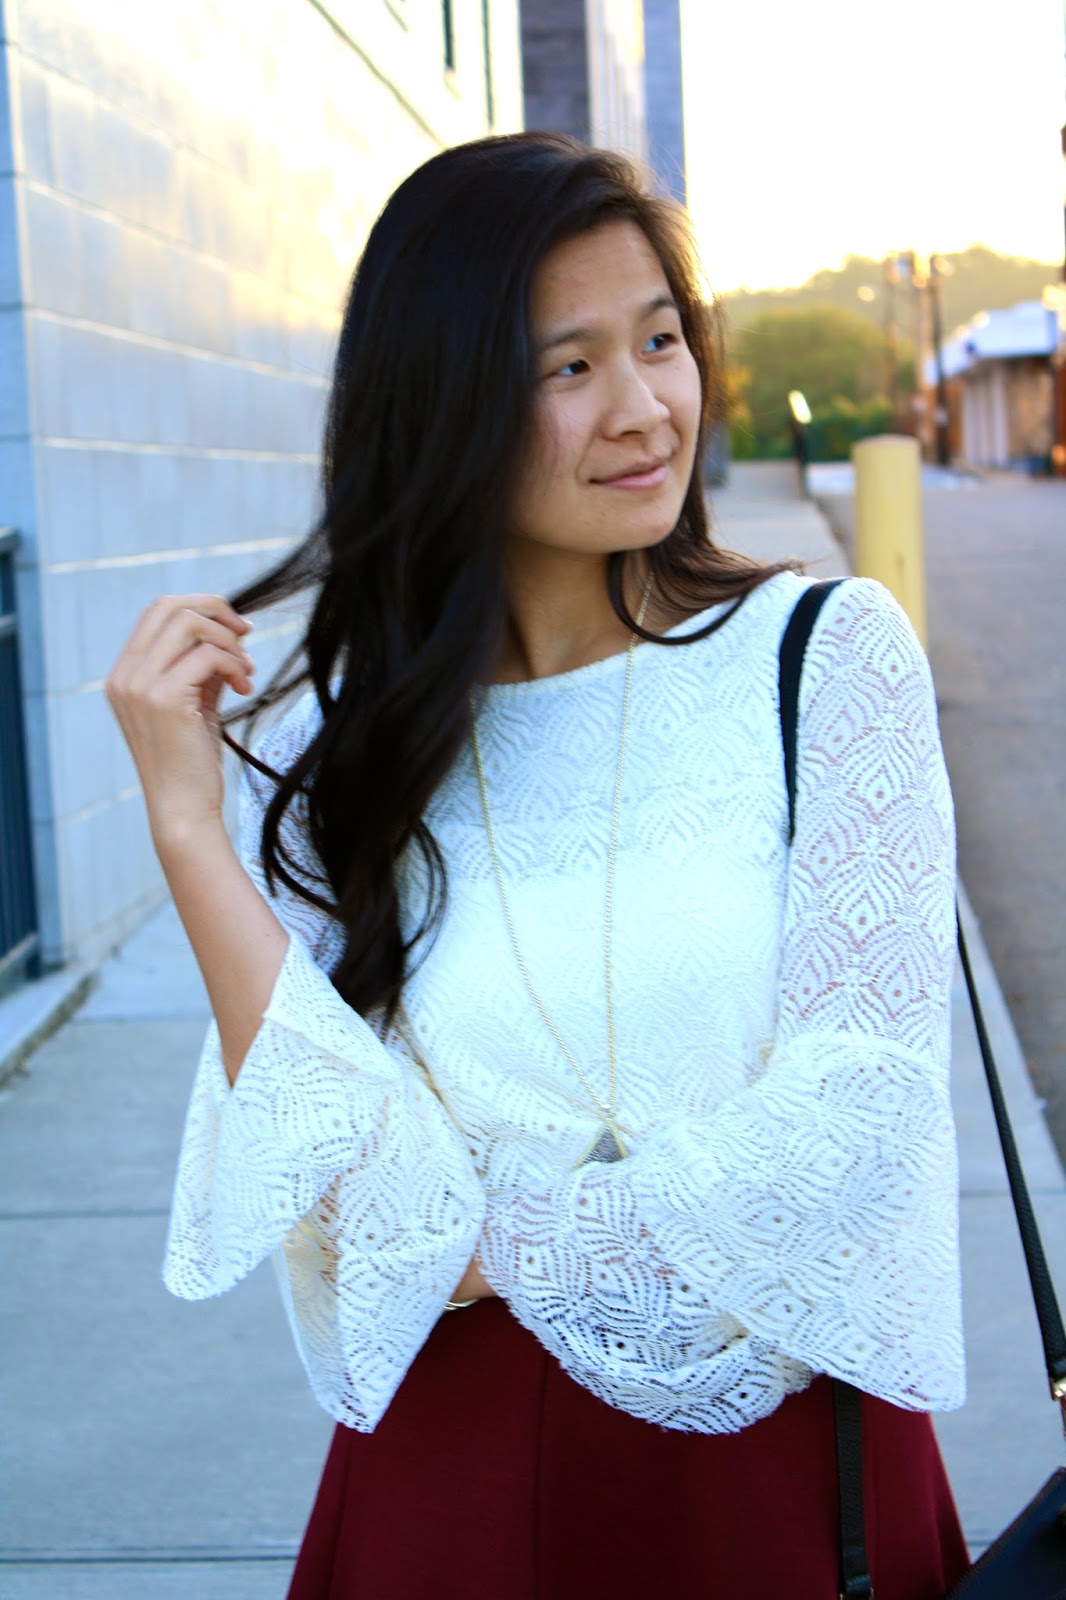  How to style a white lace bell sleeve top | Fall trends